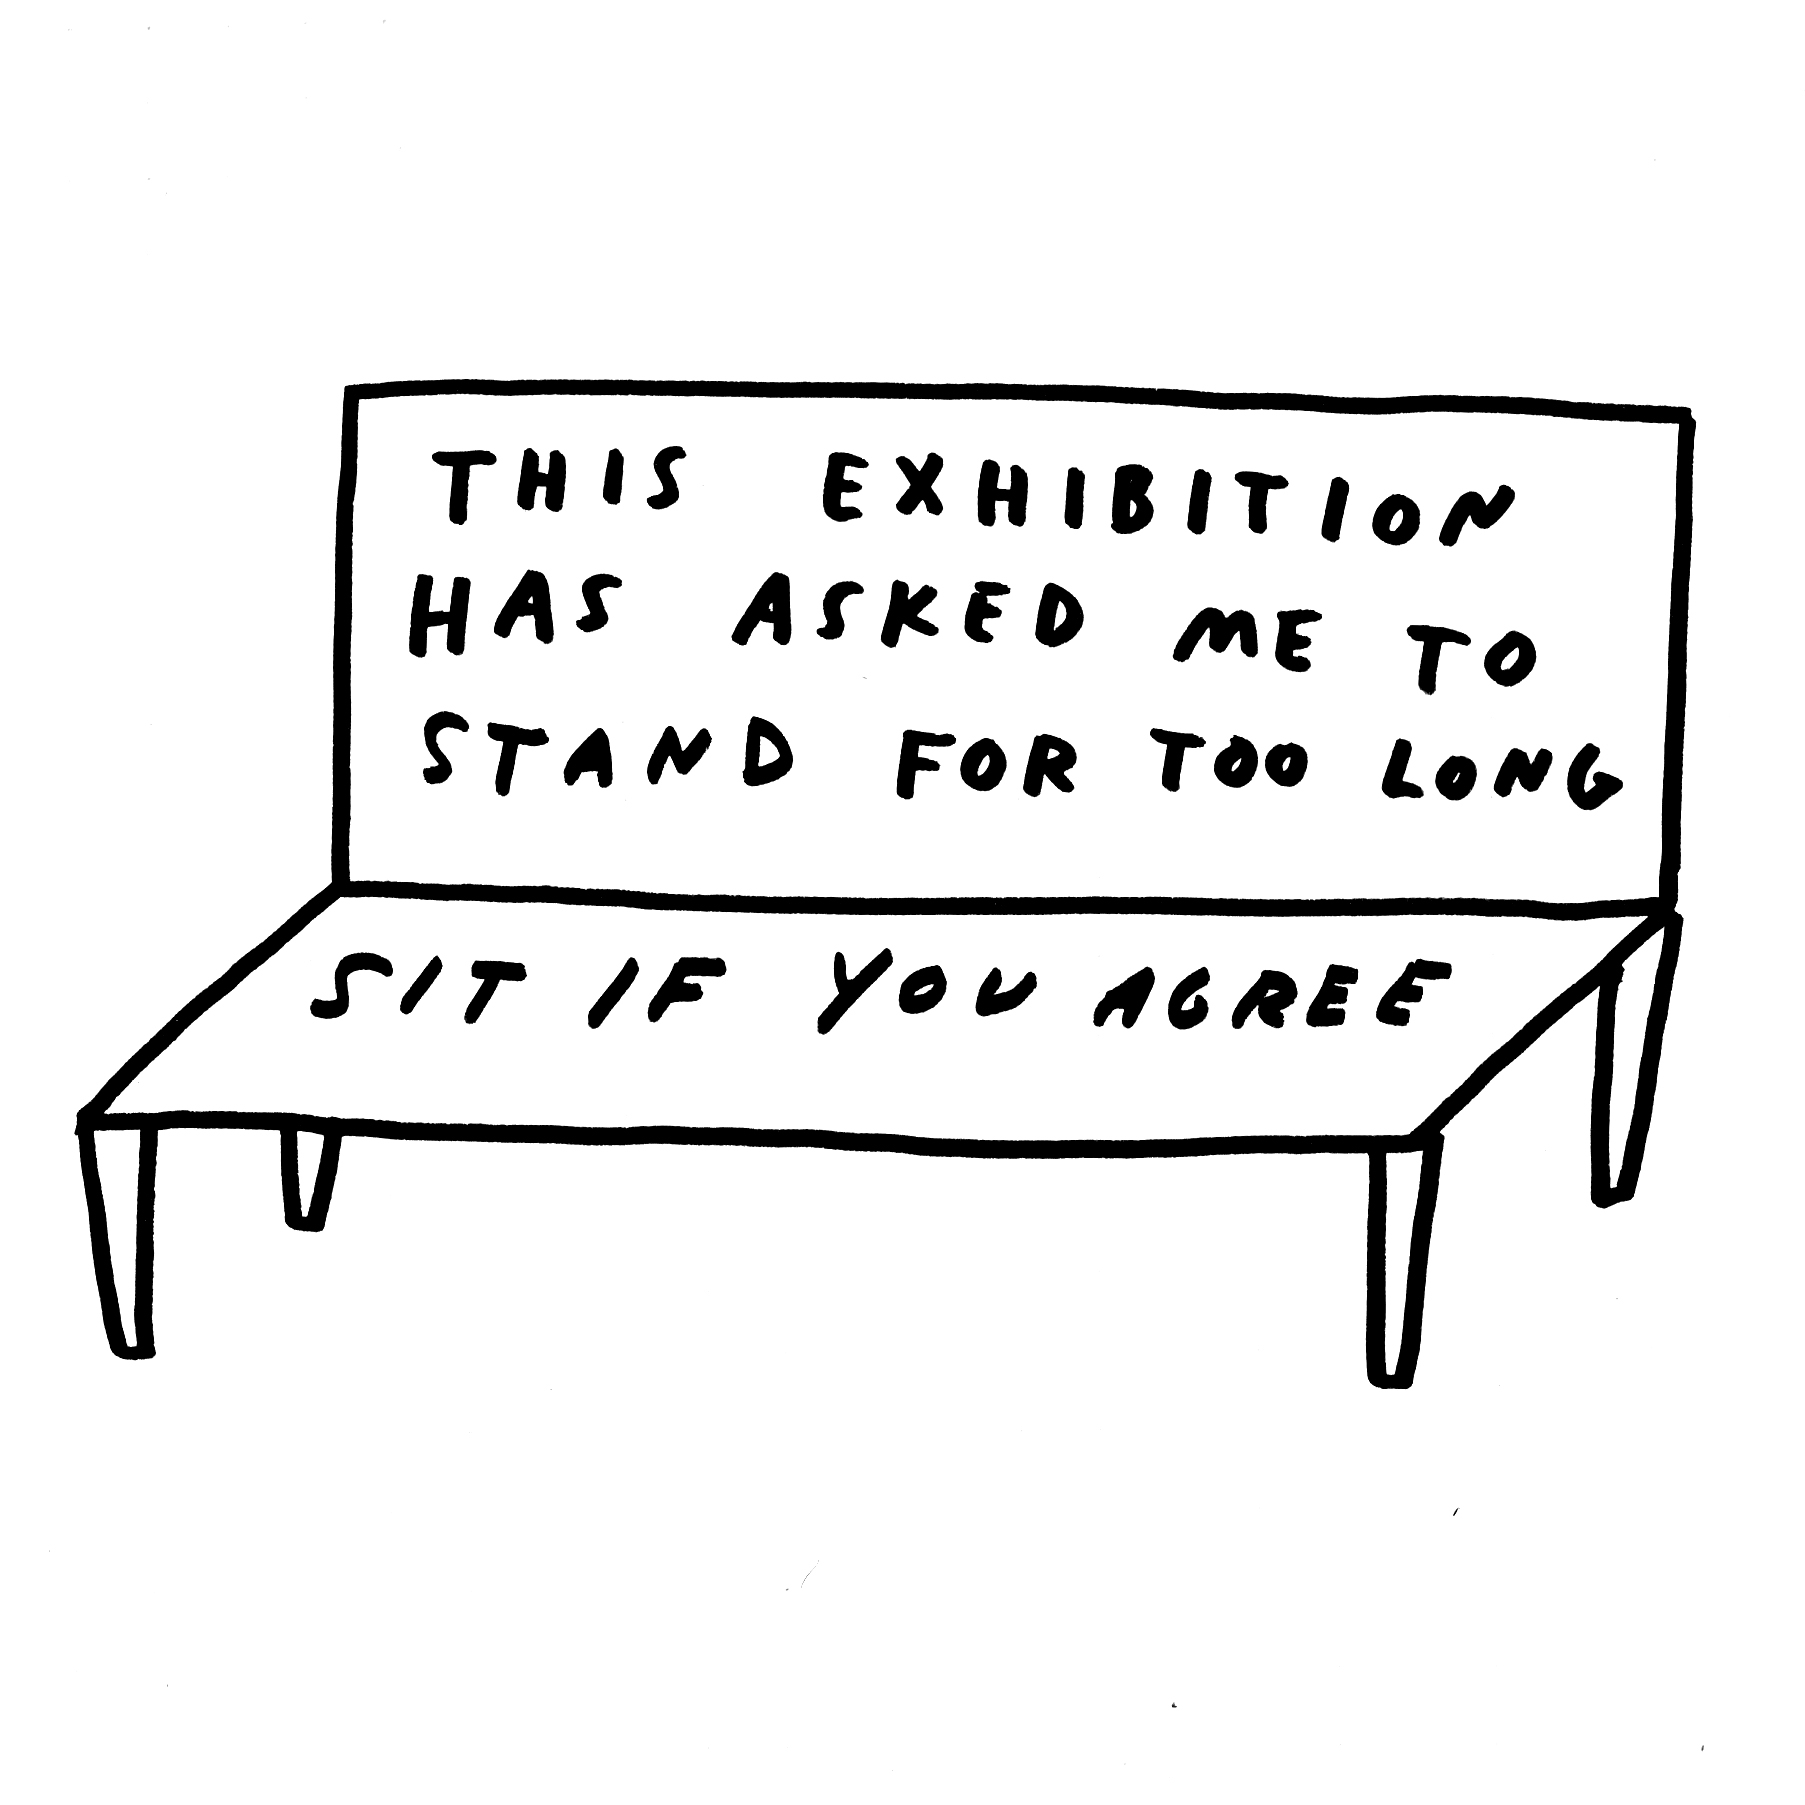 Line drawing of a bench. Text on the bench reads, “This exhibition has asked me to stand for too long. Sit if you agree.”